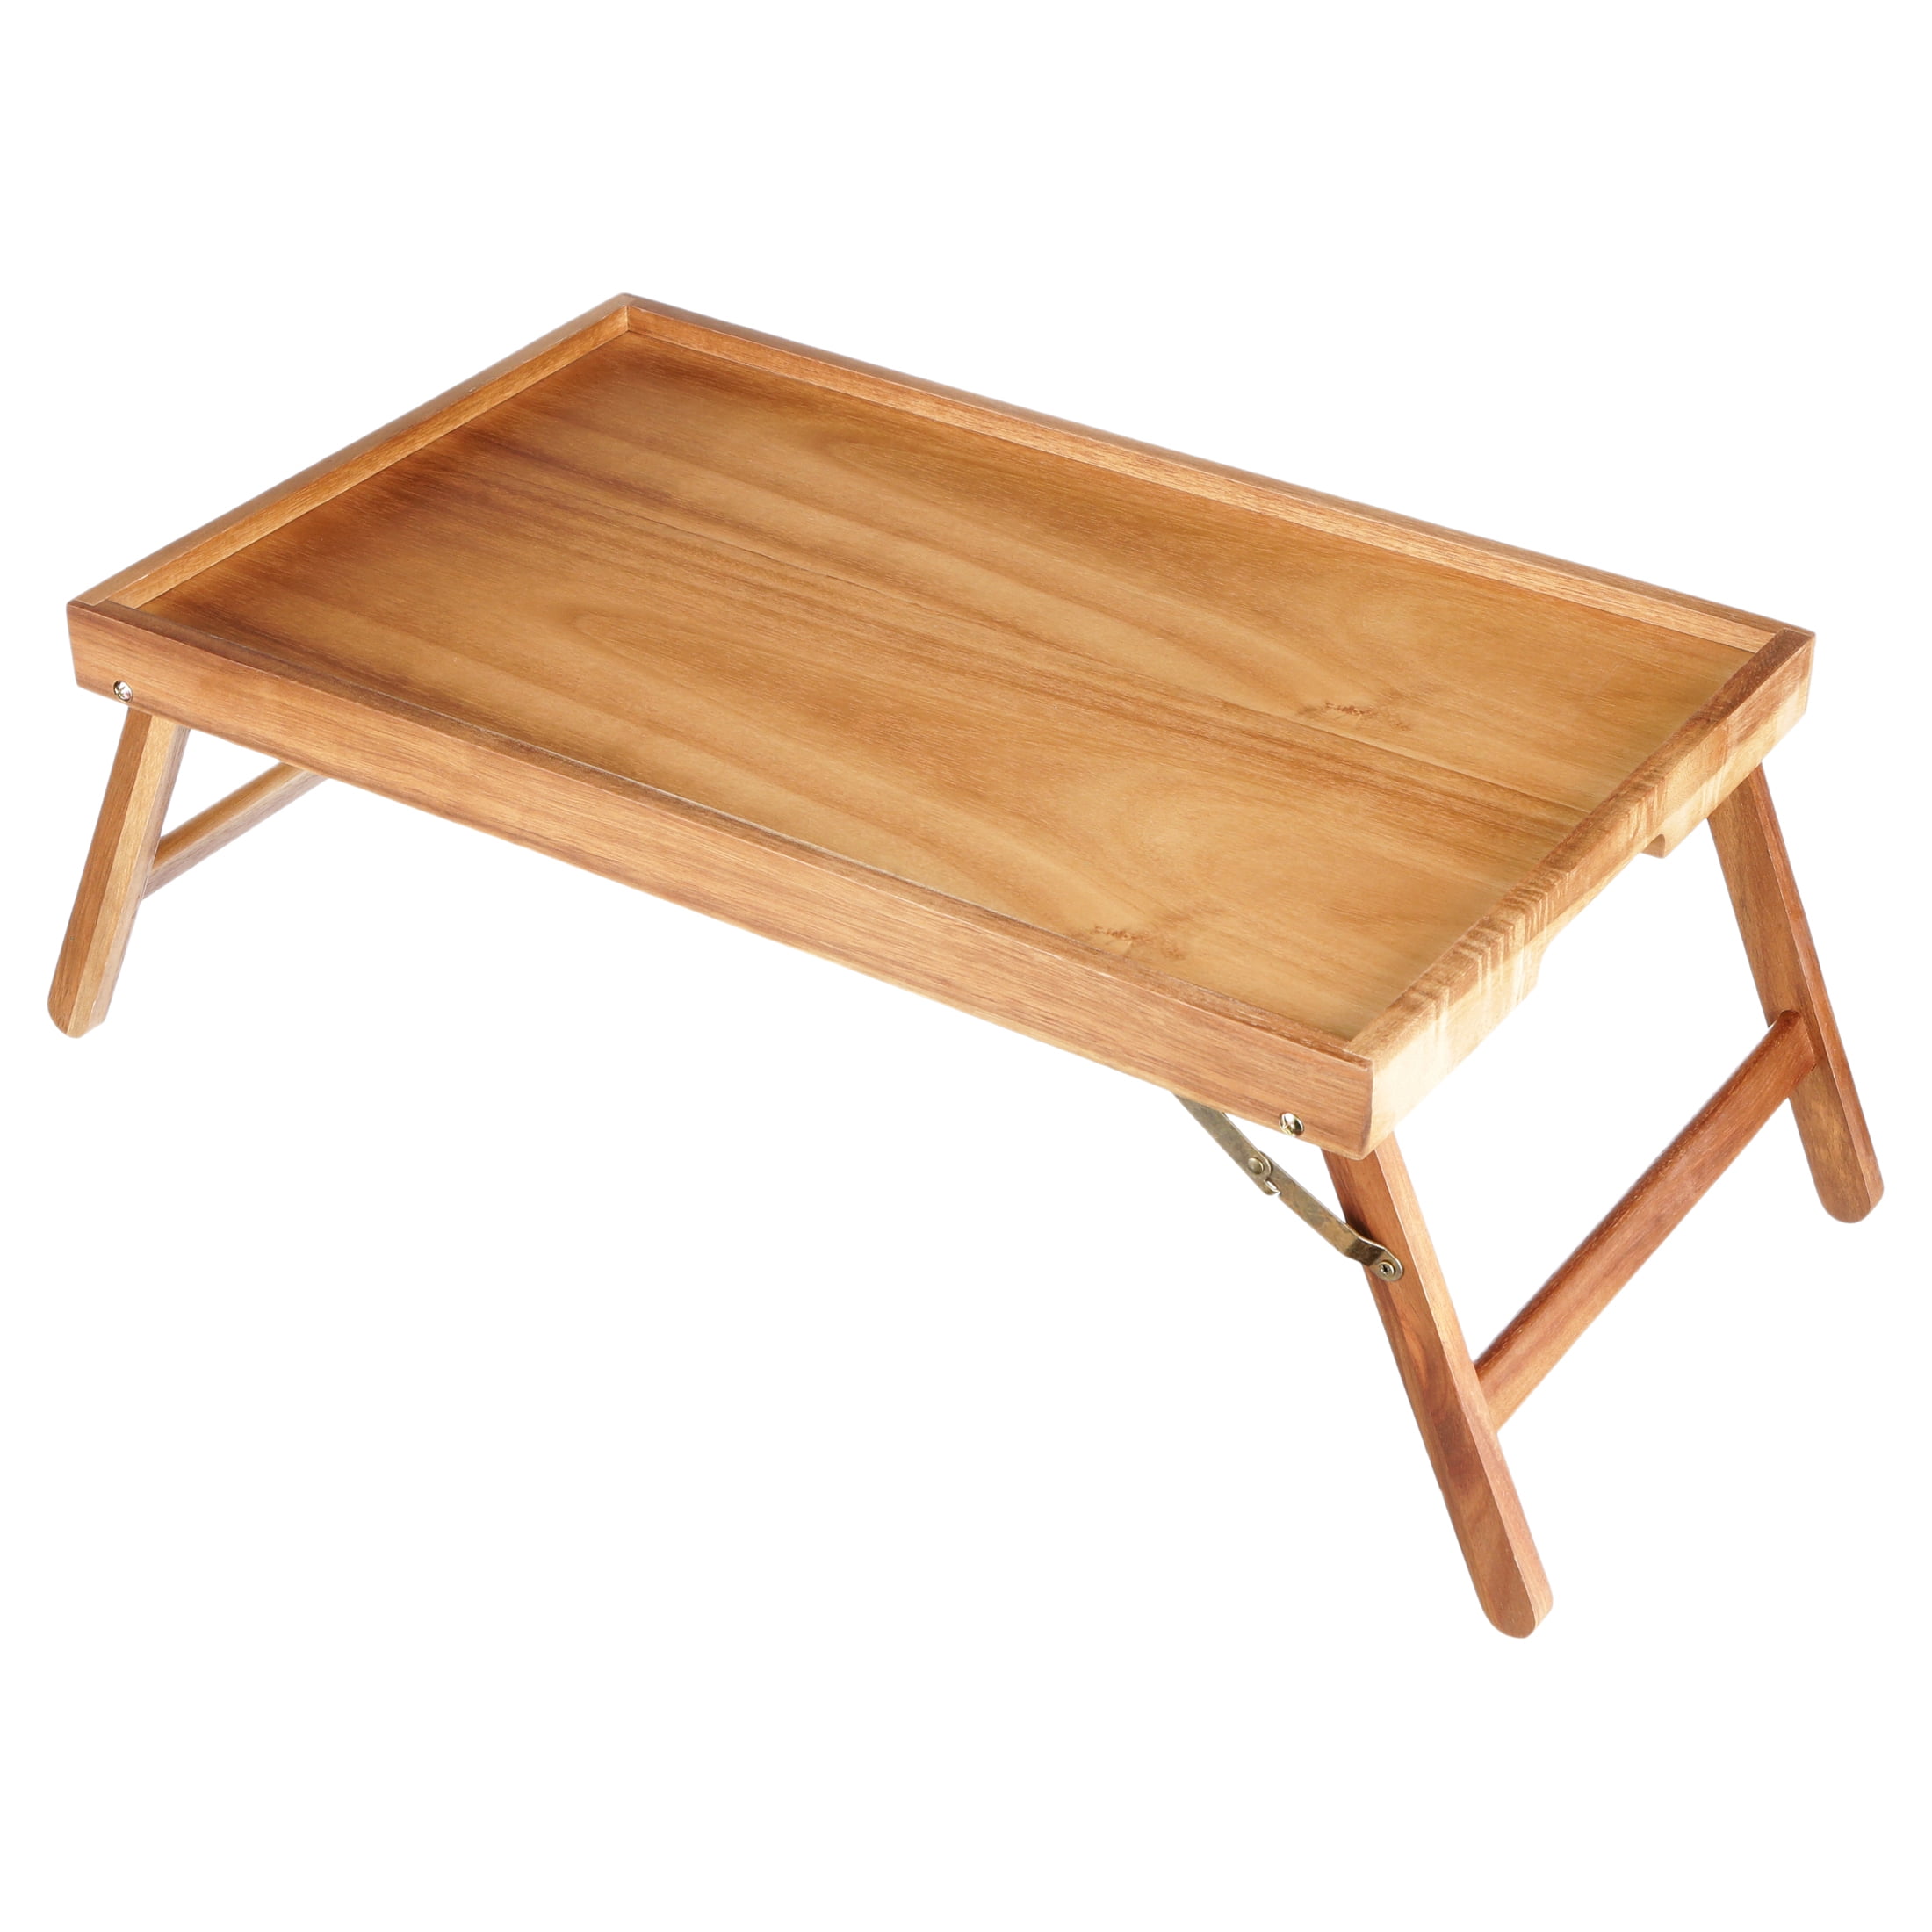 VaeFae Acacia Bed Table Tray, Wooden Breakfast Tray with Folding Legs, Bed  Tray for Eating and Laptop, Eating Trays for Bedroom